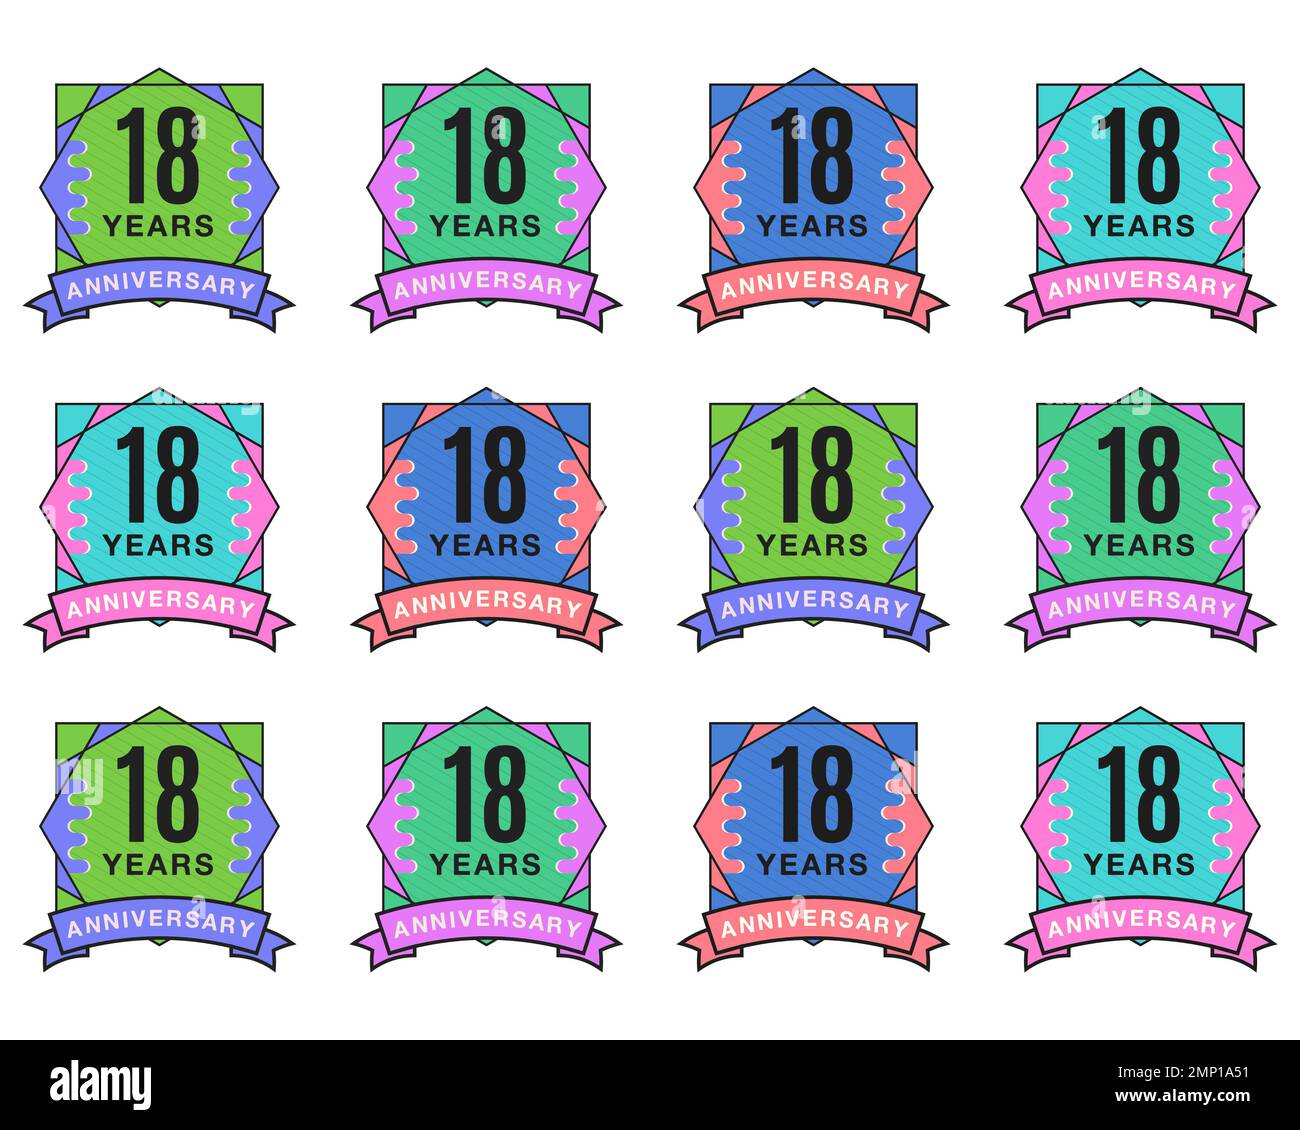 Anniversary Logo Templates Collection. Wedding badges in flat modern style with different color palletes. Birthday anniversary labels set. Stock Stock Vector